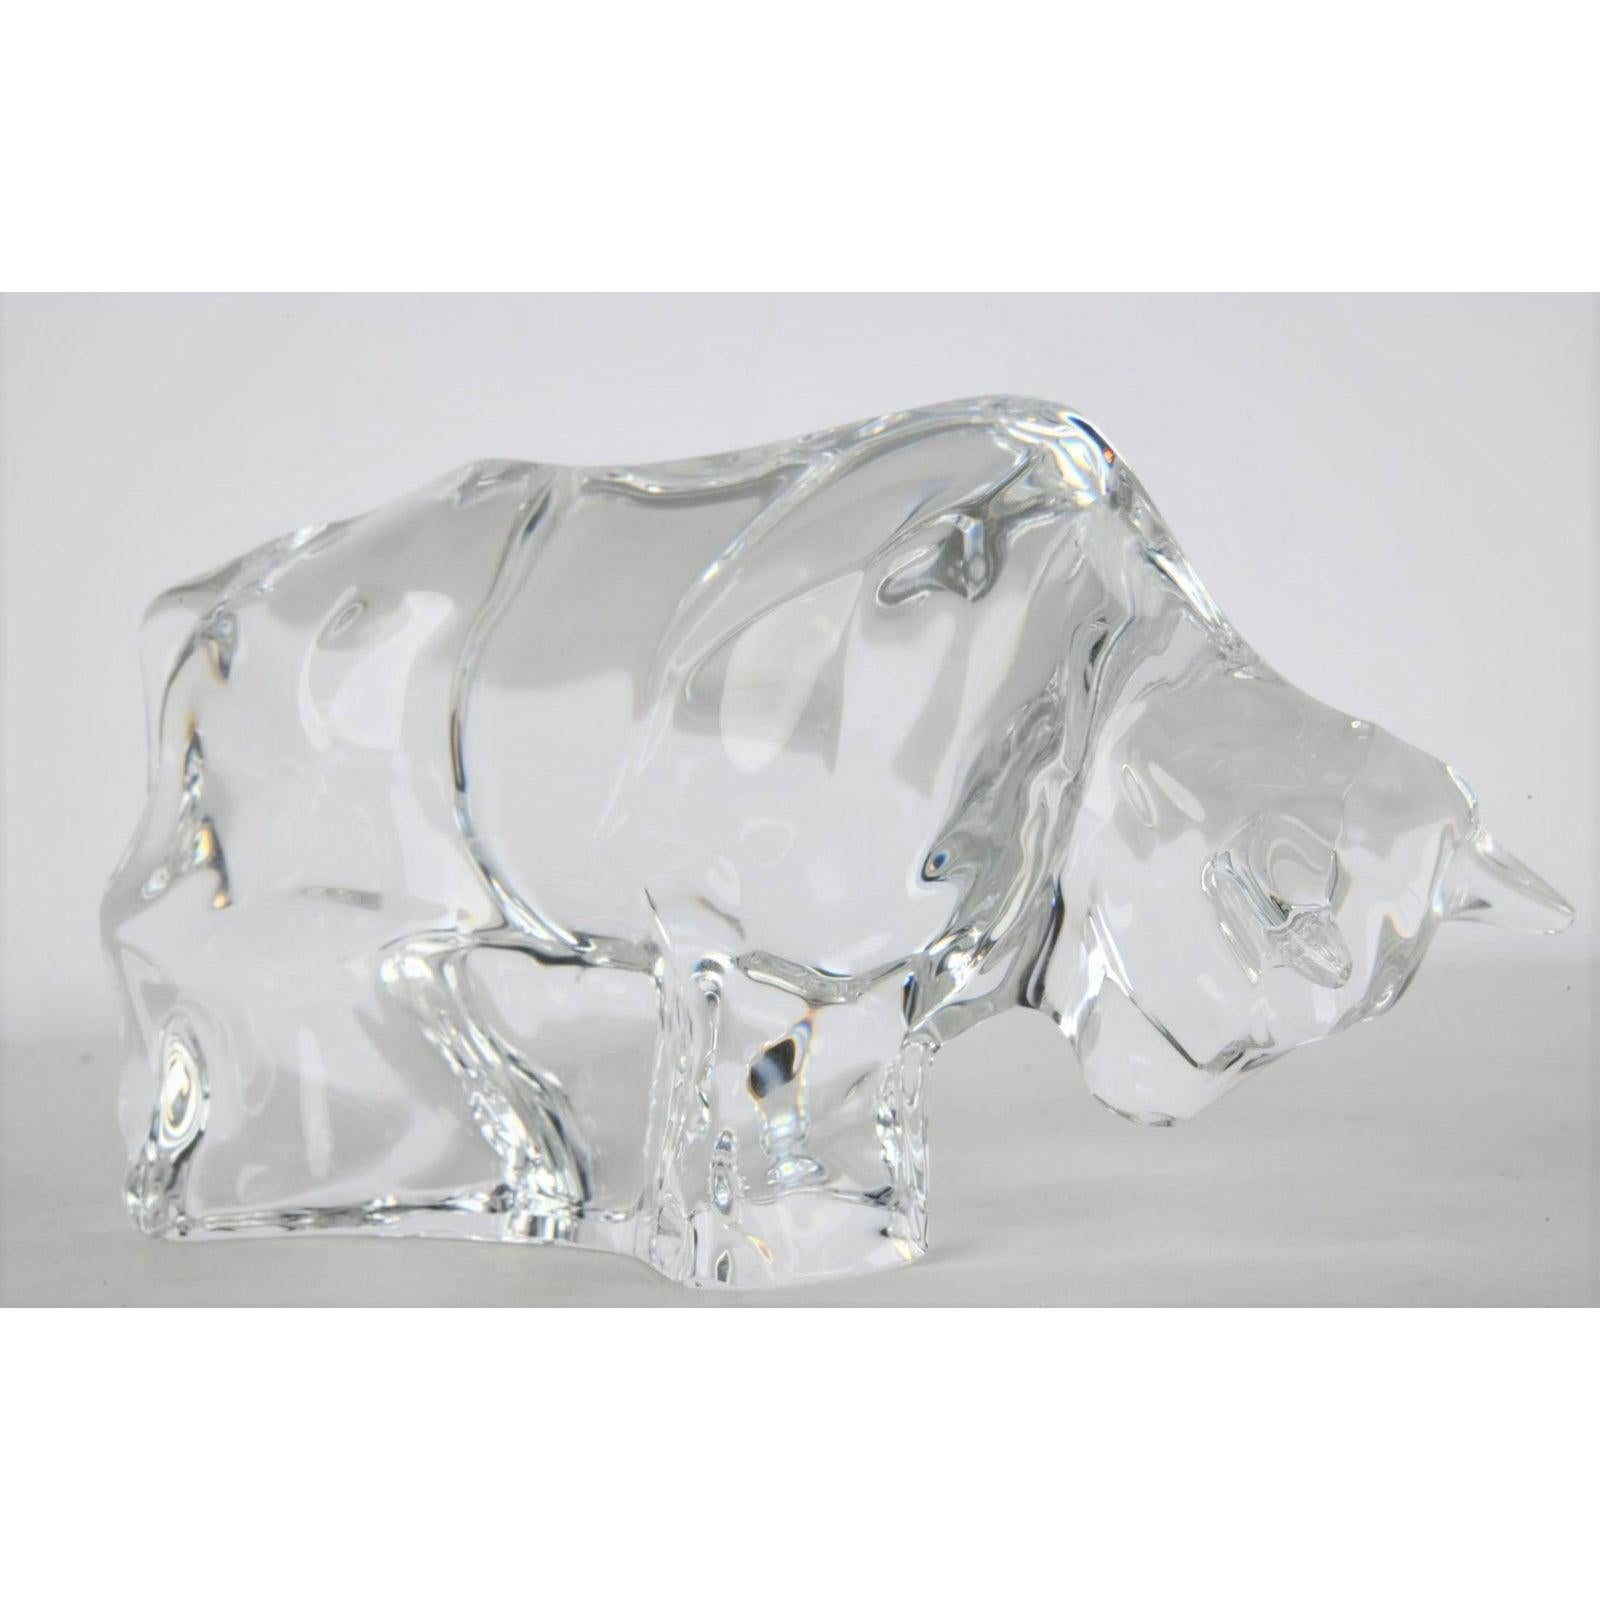 Big signed Baccarat crystal bull figurine.

Additional information:
materials: crystal.
color: transparent.
Brand: Baccarat.
Designer: Baccarat.
Period: 1990s.
Styles: Art Deco.
Item Type: vintage, antique or pre-owned.
Dimensions: 6.5